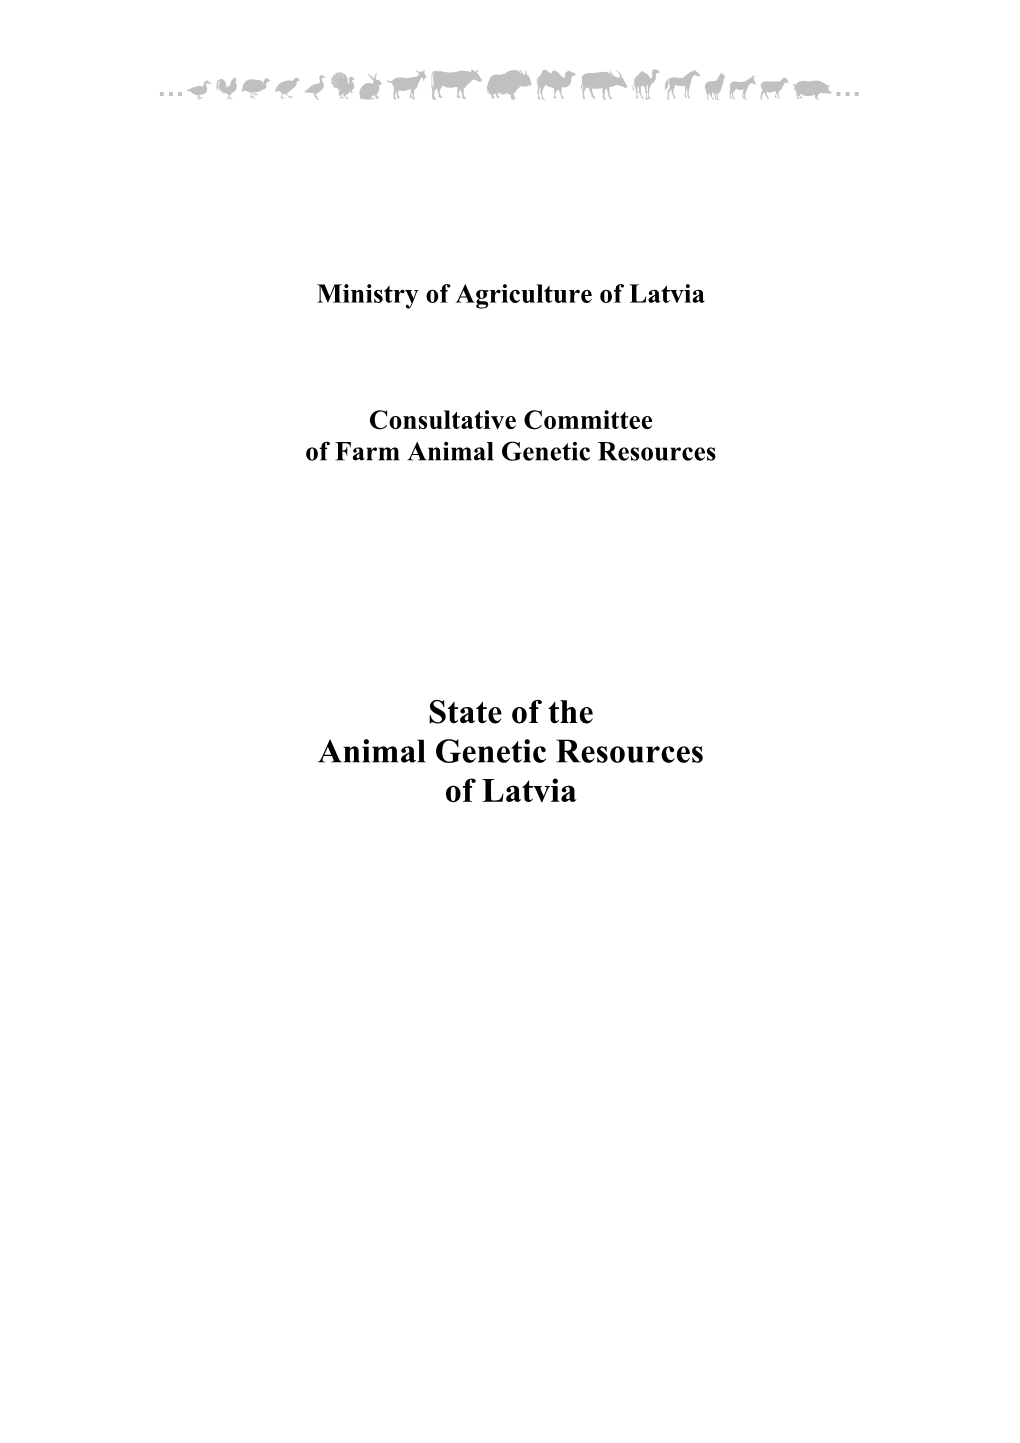 State of the Animal Genetic Resources of Latvia